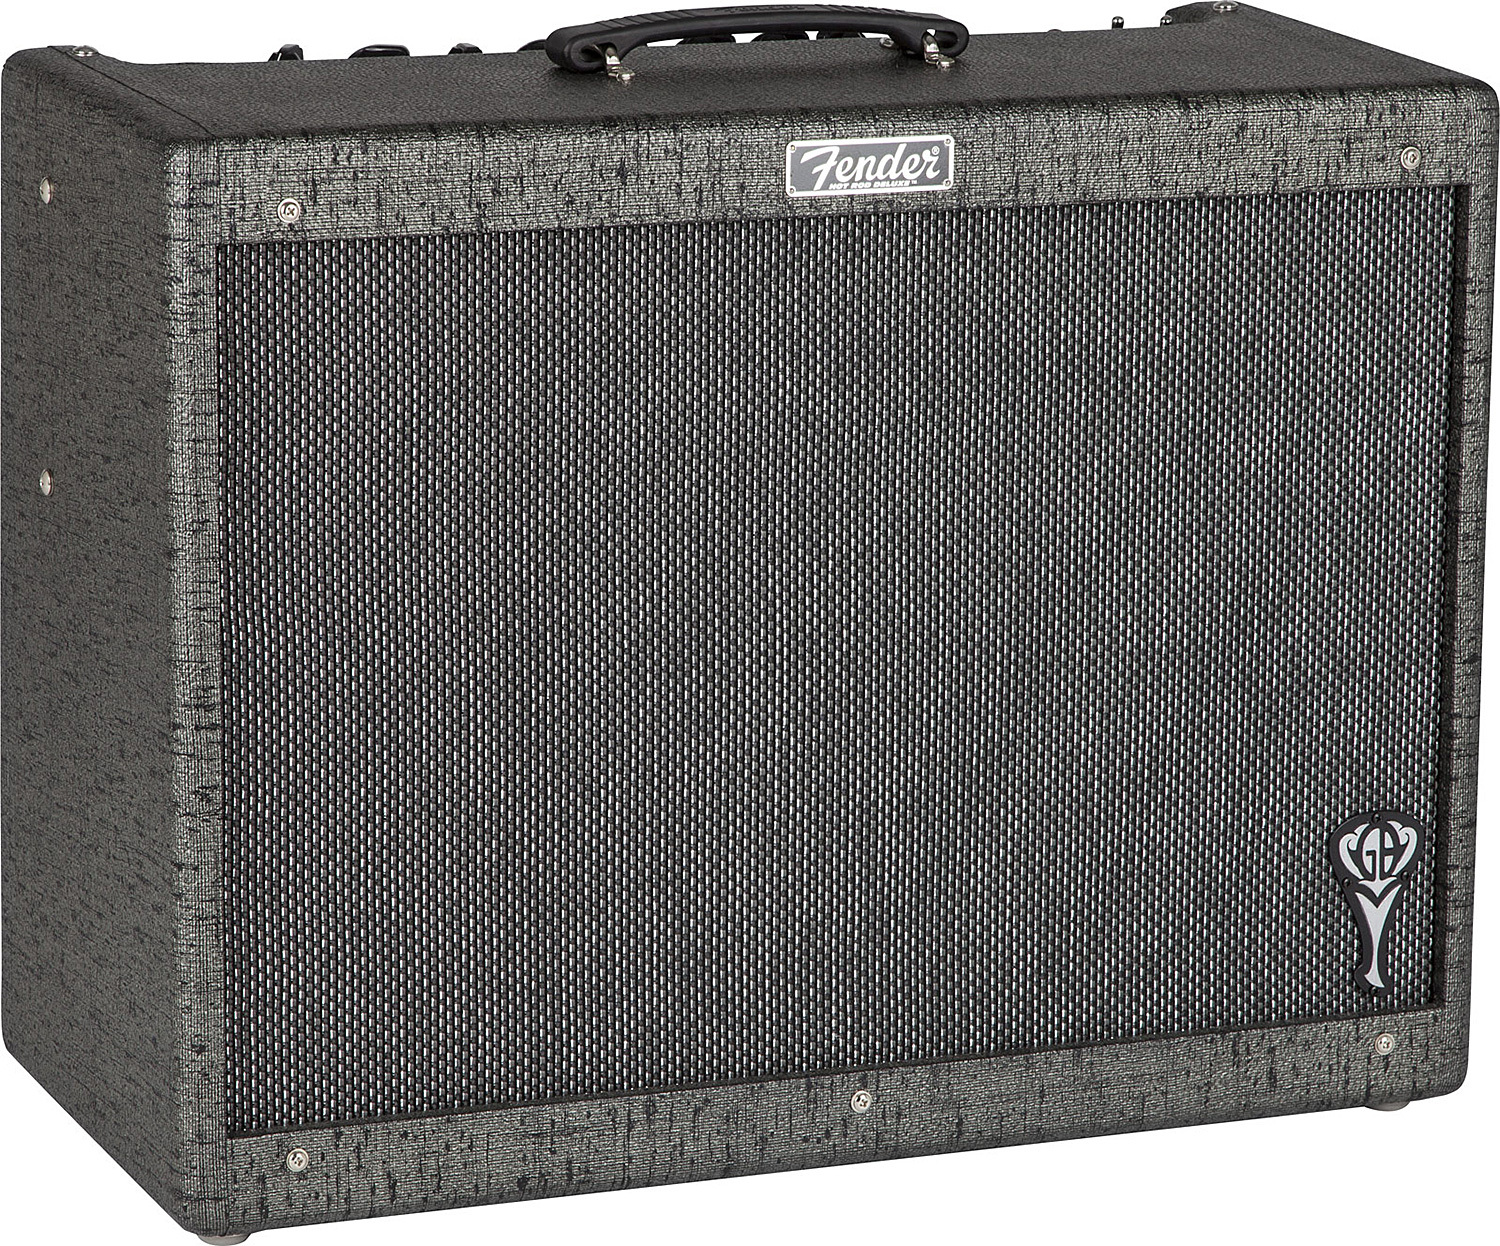 Fender Hot Rod Deluxe Gb George Benson 2012 40w 1x12 Gray Black - Electric guitar combo amp - Main picture